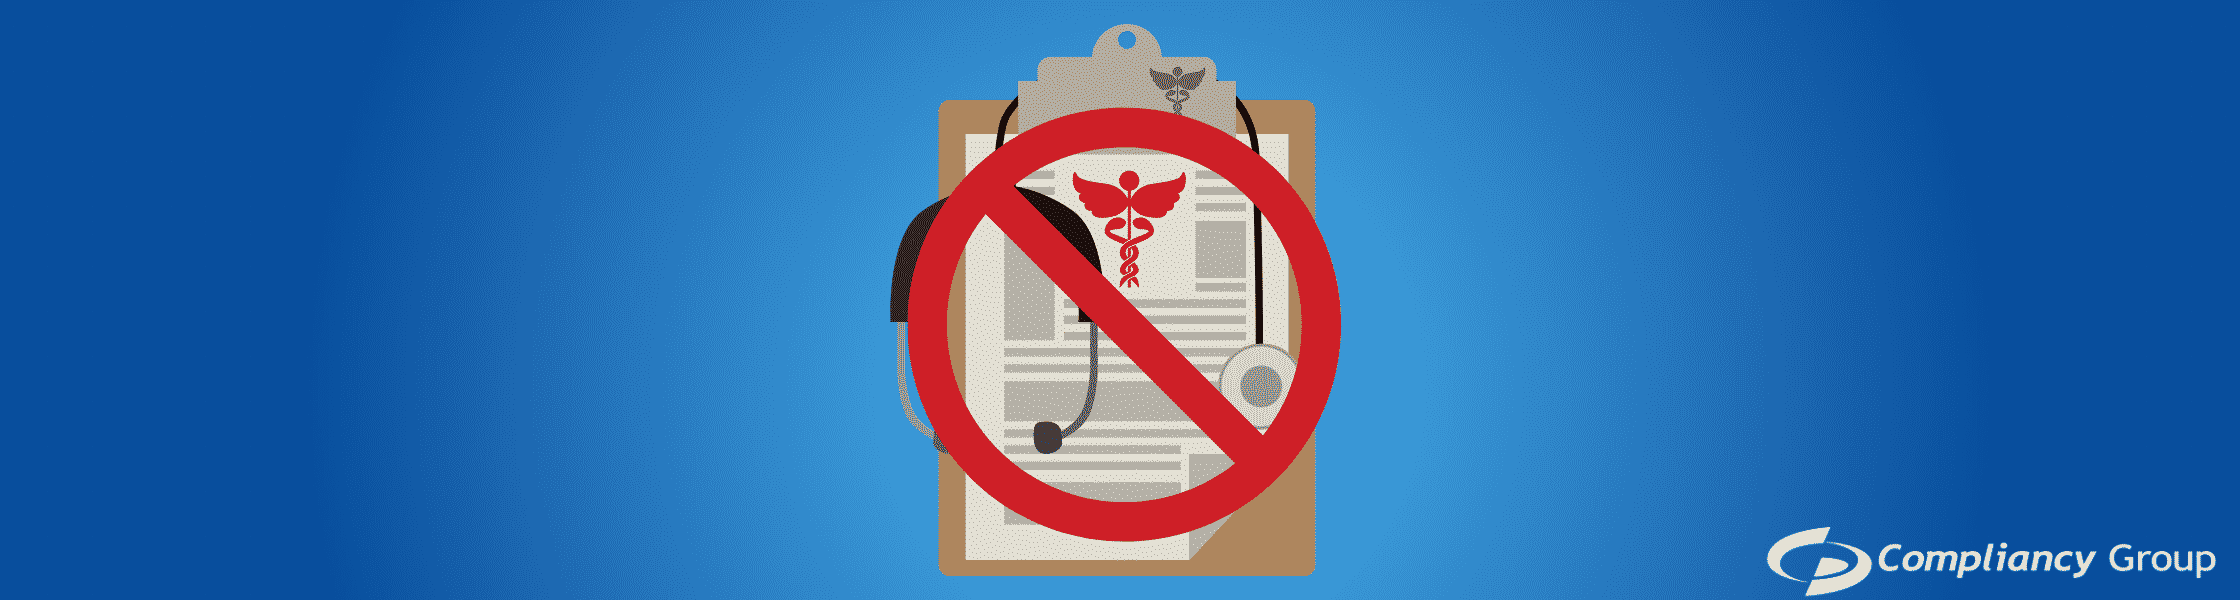 unauthorized access to patient medical records